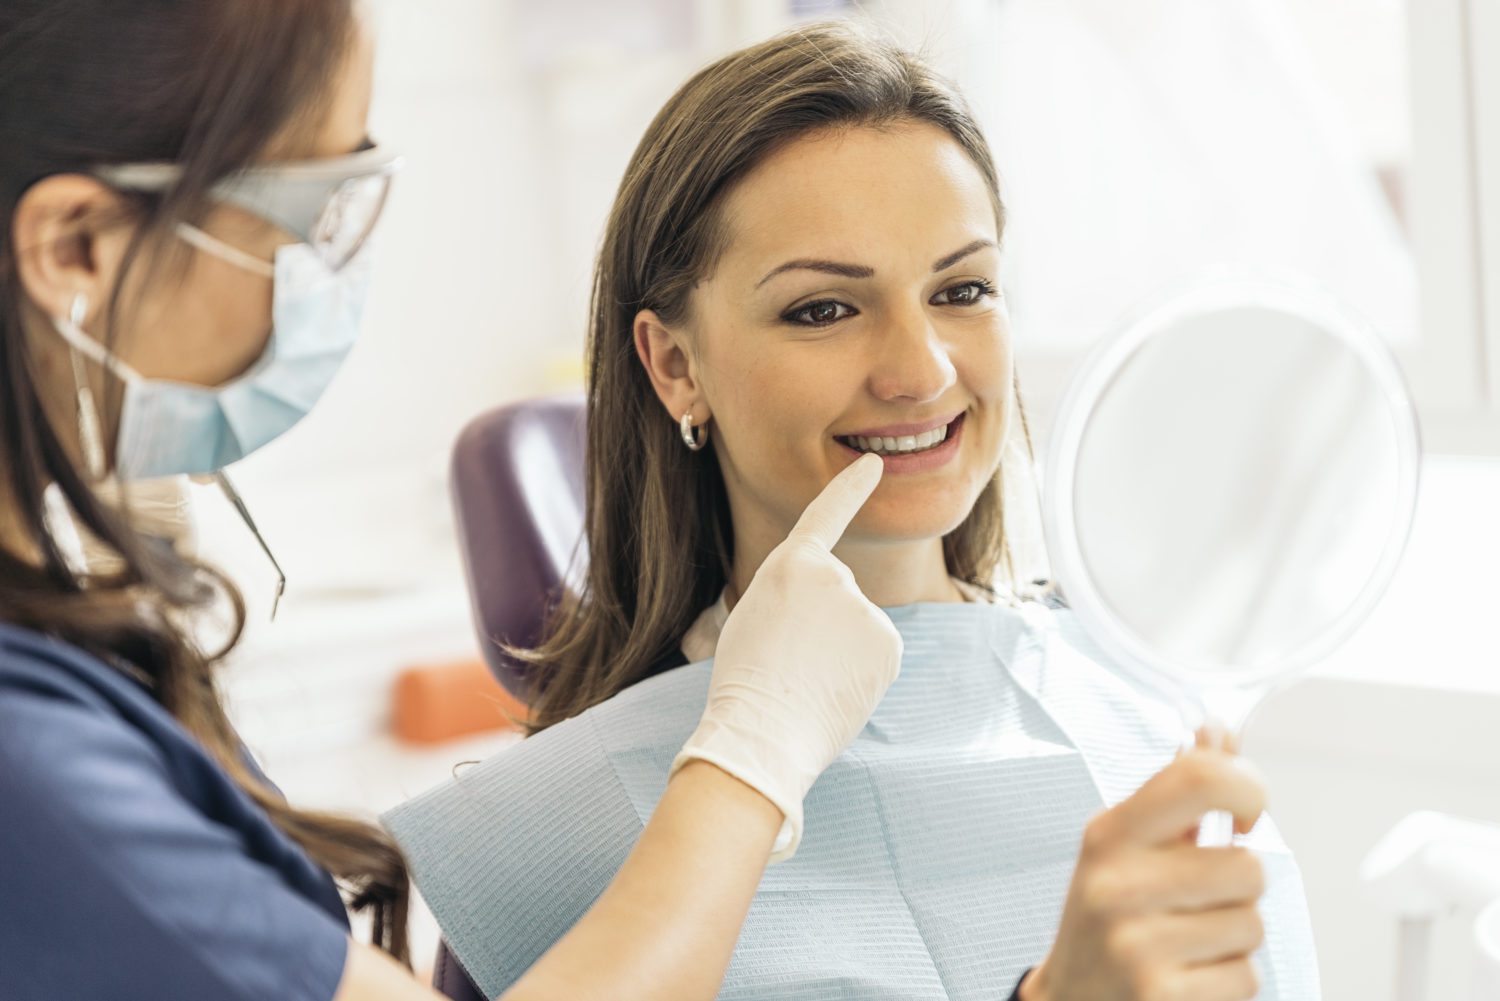 Young woman looking into a handheld mirror as a dental hygienist points at her mouth